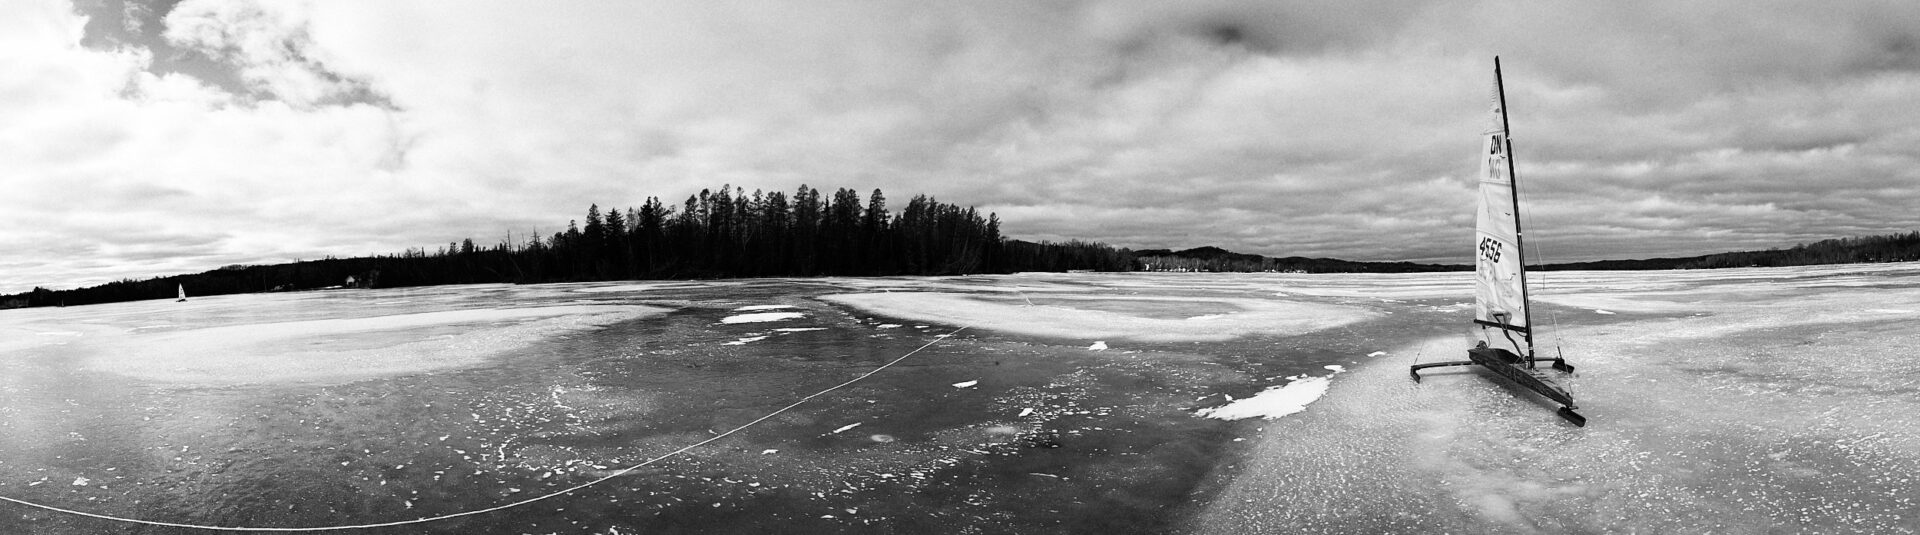 Monochrome panoramic image of dn iceboat sitting on the ice of south lake leelanau Michigan with cedar trees in the background